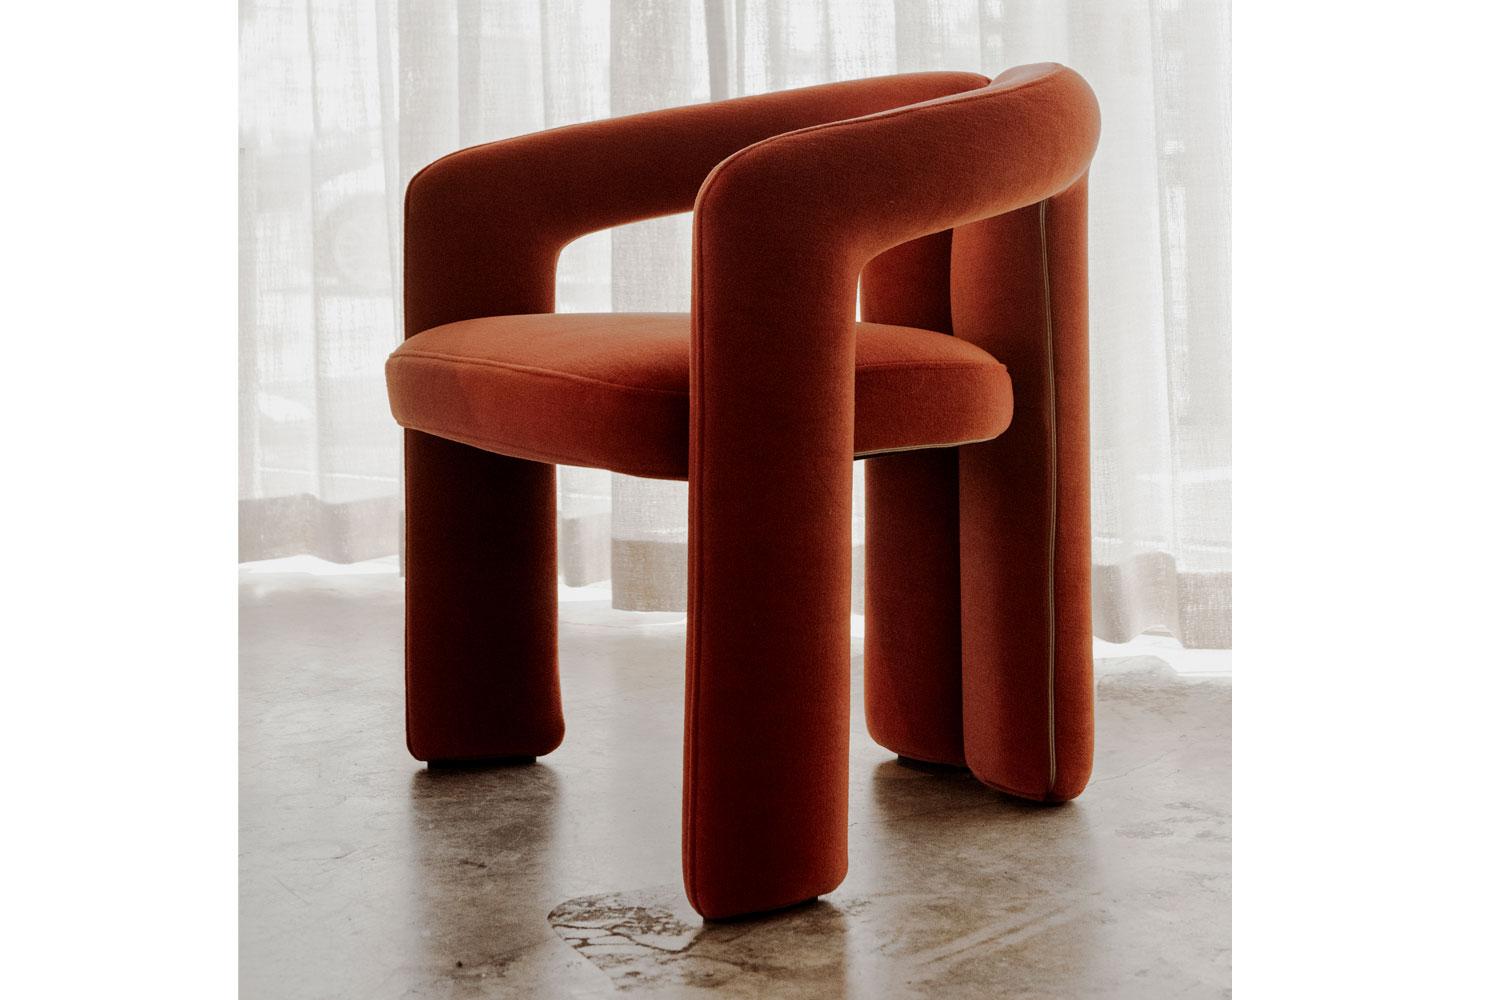 Dudet Armchair by Cassina.

Designed by Patricia Urquiola, Dudet has a soft, enveloping shape that offers contemporary comfort with a well-developed sense of 
environmental awareness. This small armchair, which strongly references 1970s design,